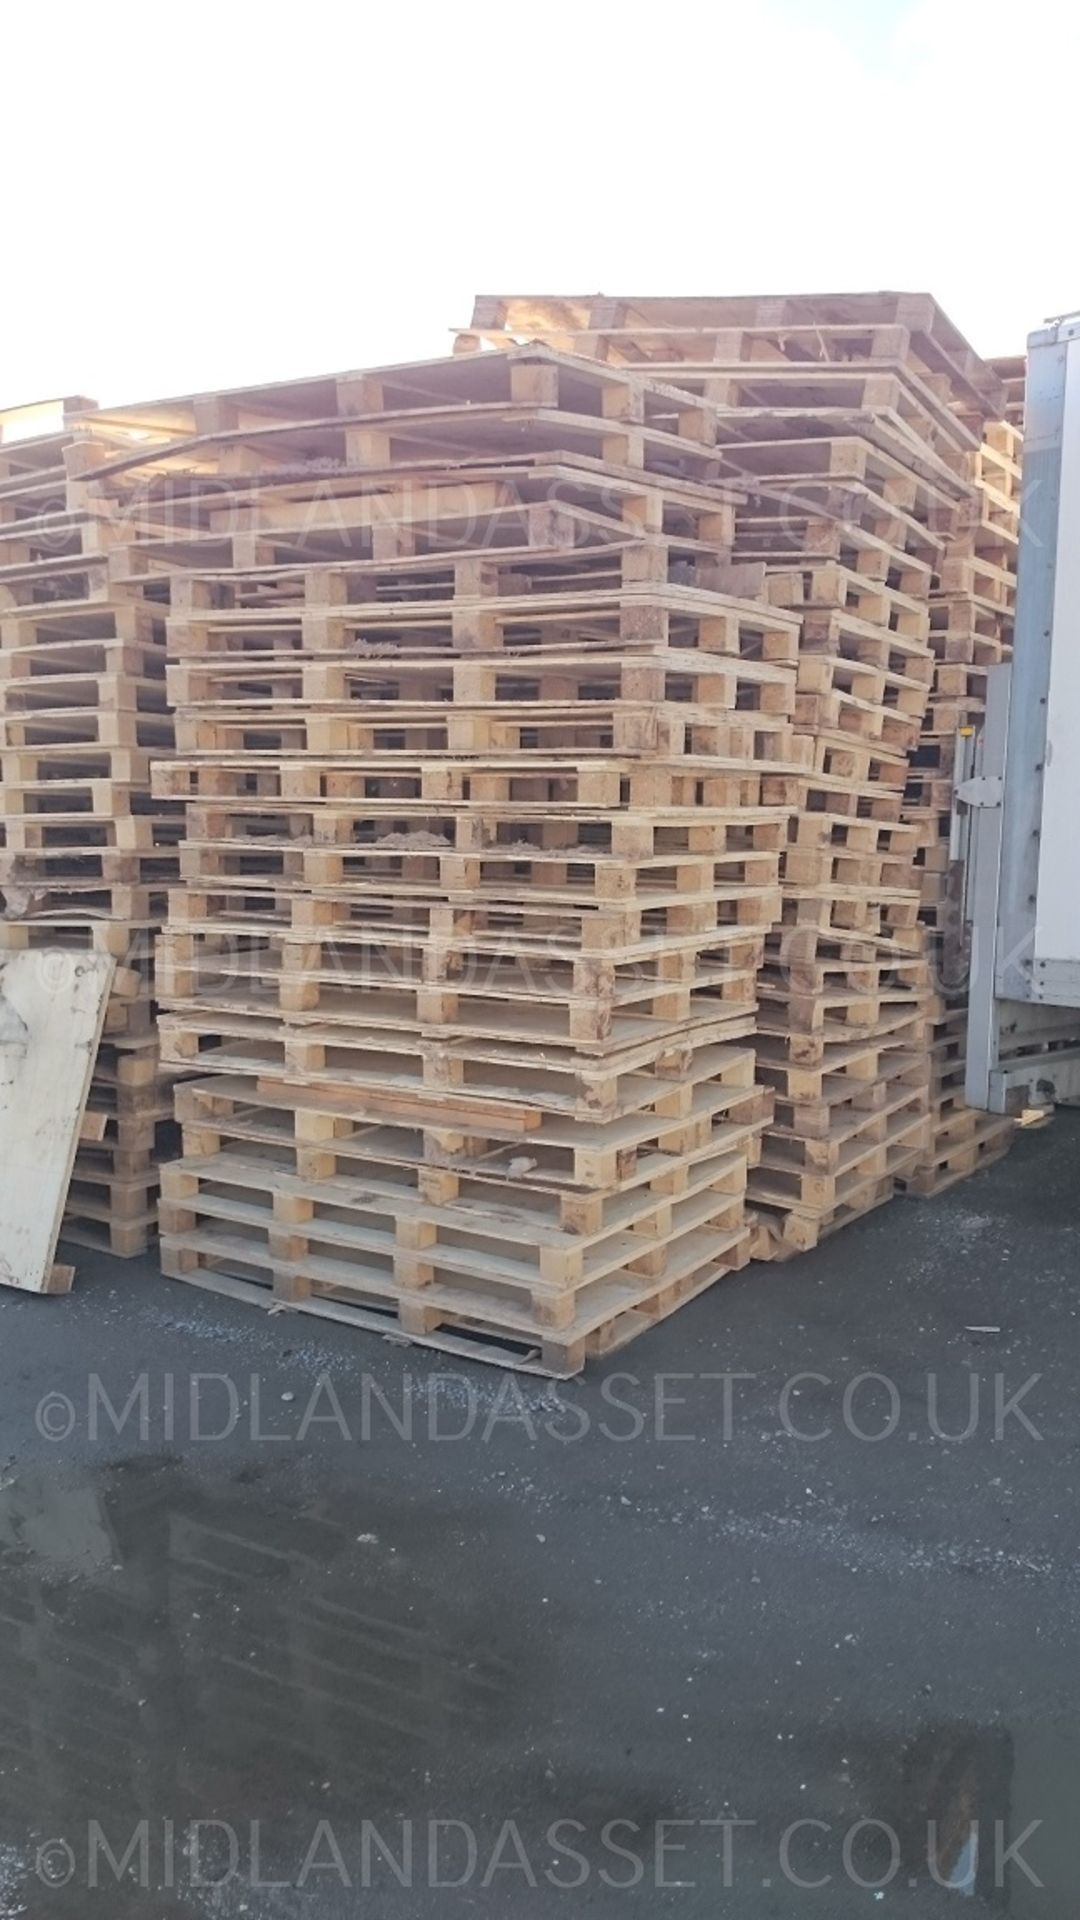 PLY TOP PALLETS IN PACKS OF 10   4 WAY ENTRY PLY BOARDED DIMENSIONS:  DEPTH: 1120MM WIDTH: 1690MM NO - Image 3 of 3